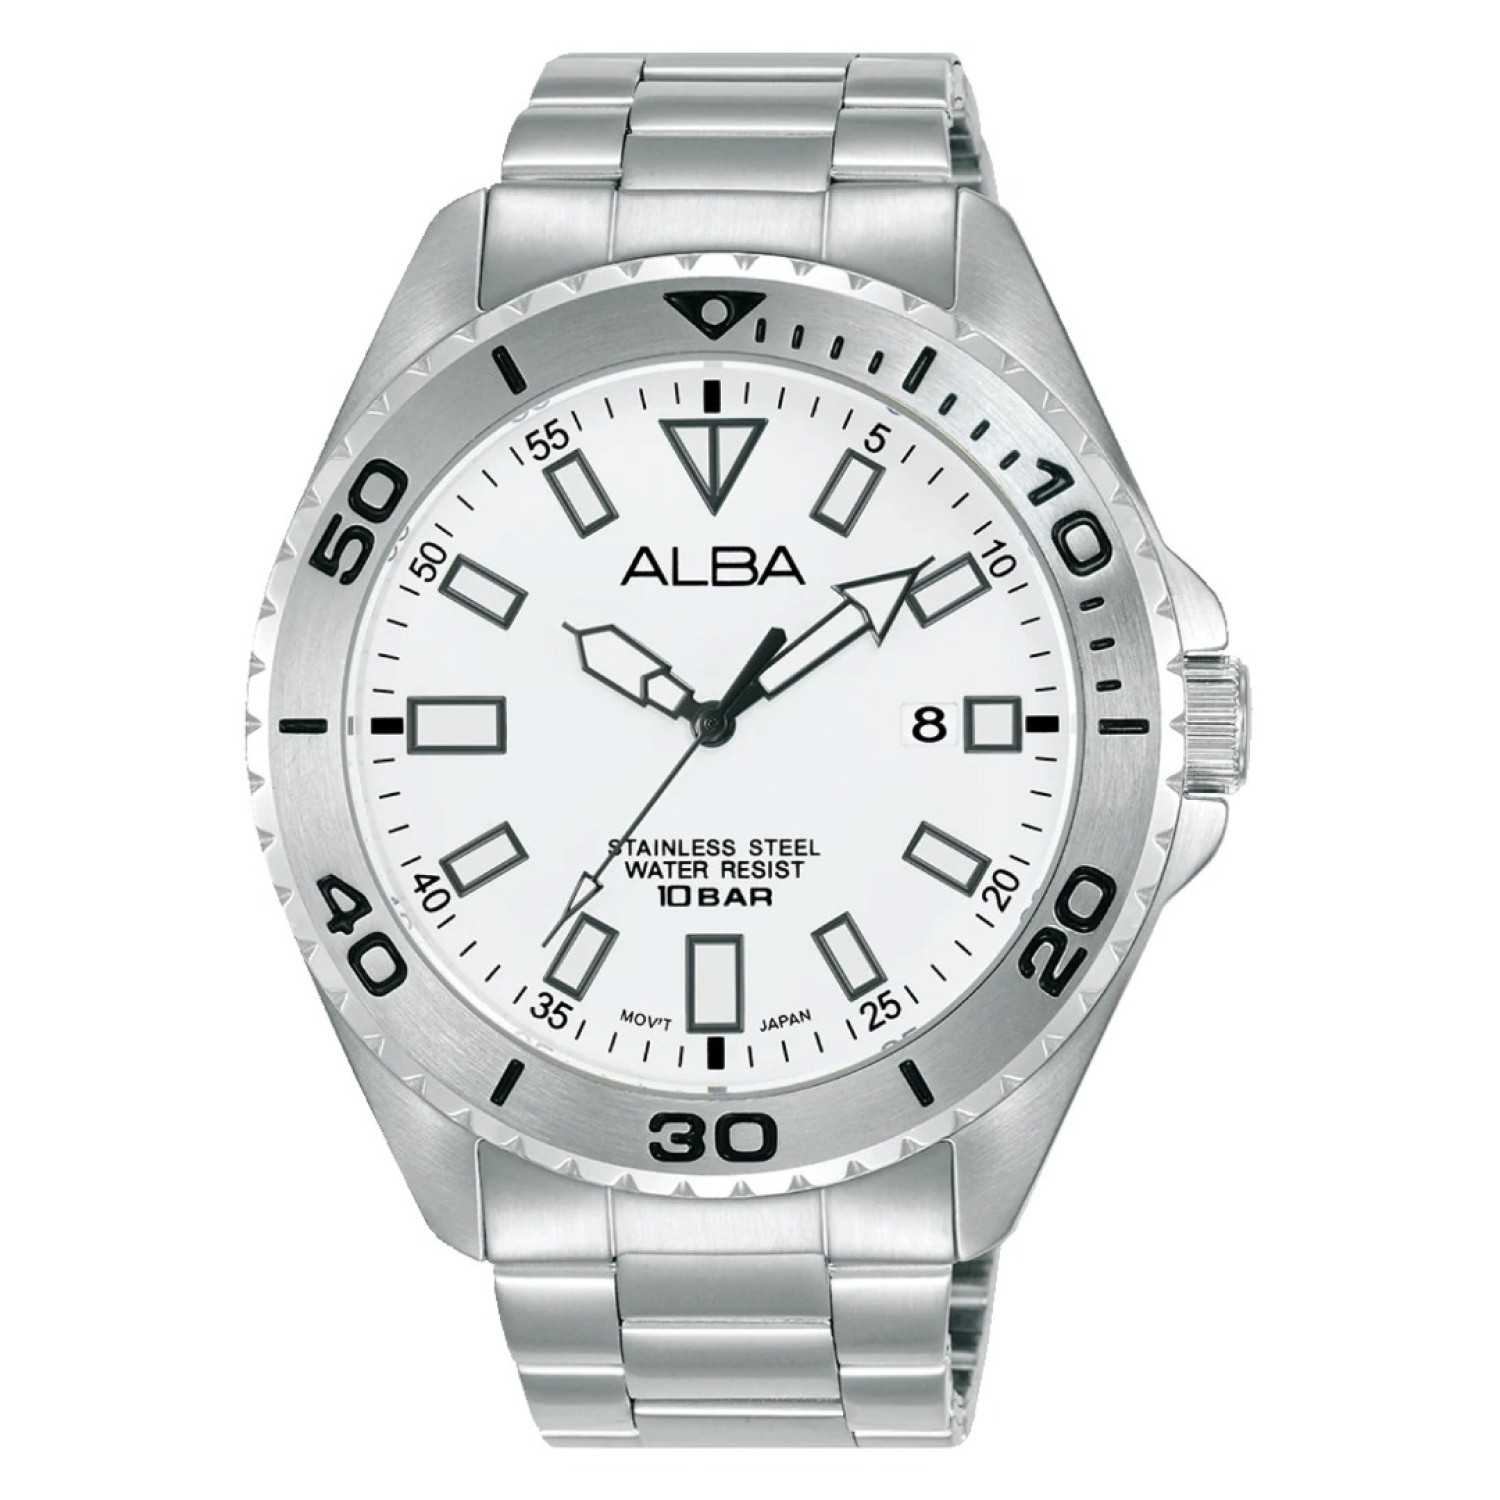 AS9Q45X ALBA WORKMAN SPORTS STAINLESS STEEL WATCH. Alba AS9Q45X is an elegant and stylish mens analog watch that combines classic design with modern technology.